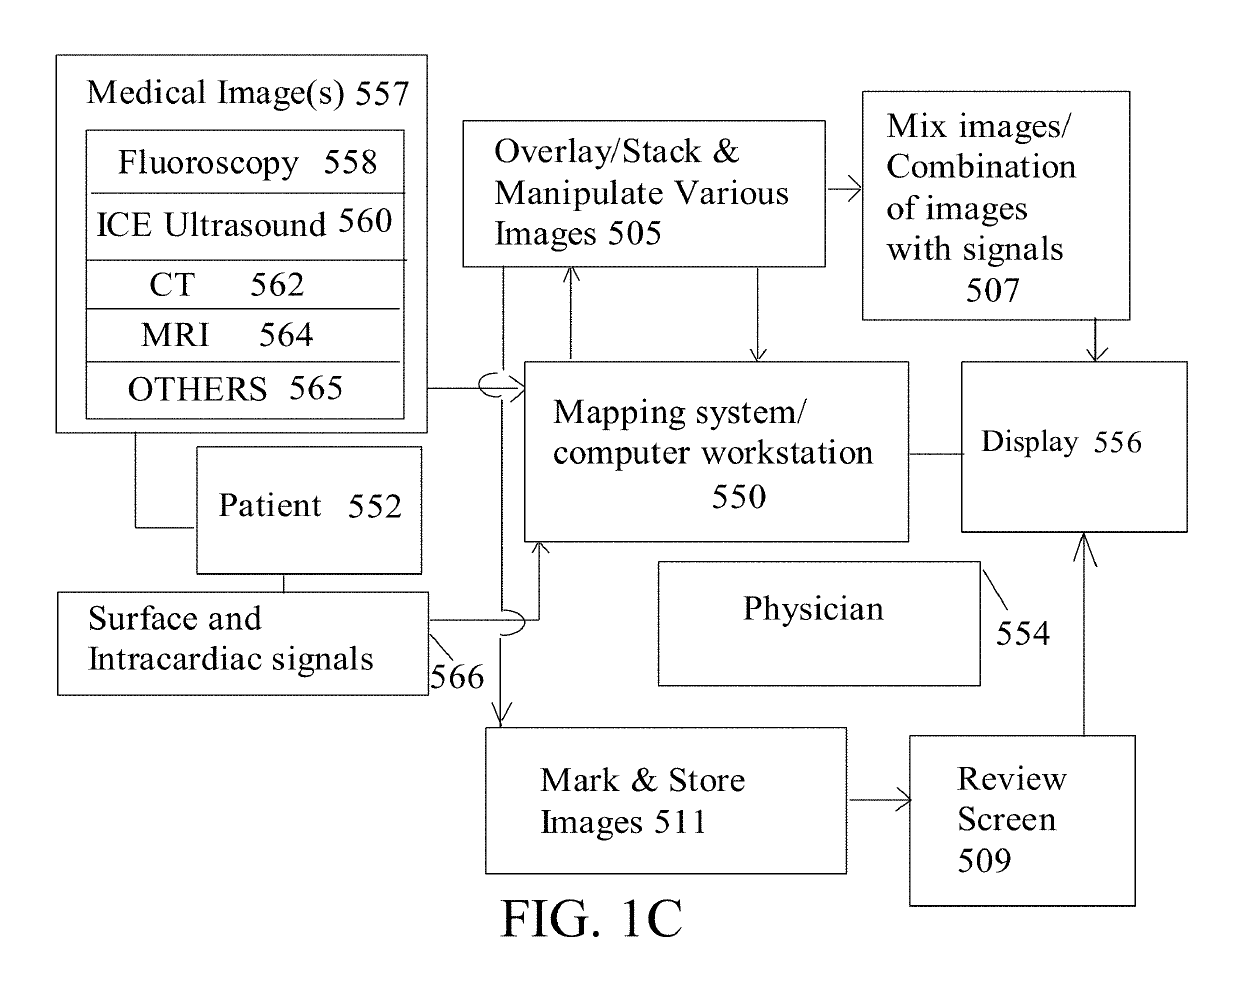 Methods and system for atrial fibrillation ablation using medical images based cardiac mapping with 3-dimentional (3D) tagging with optional esophageal temperature monitoring